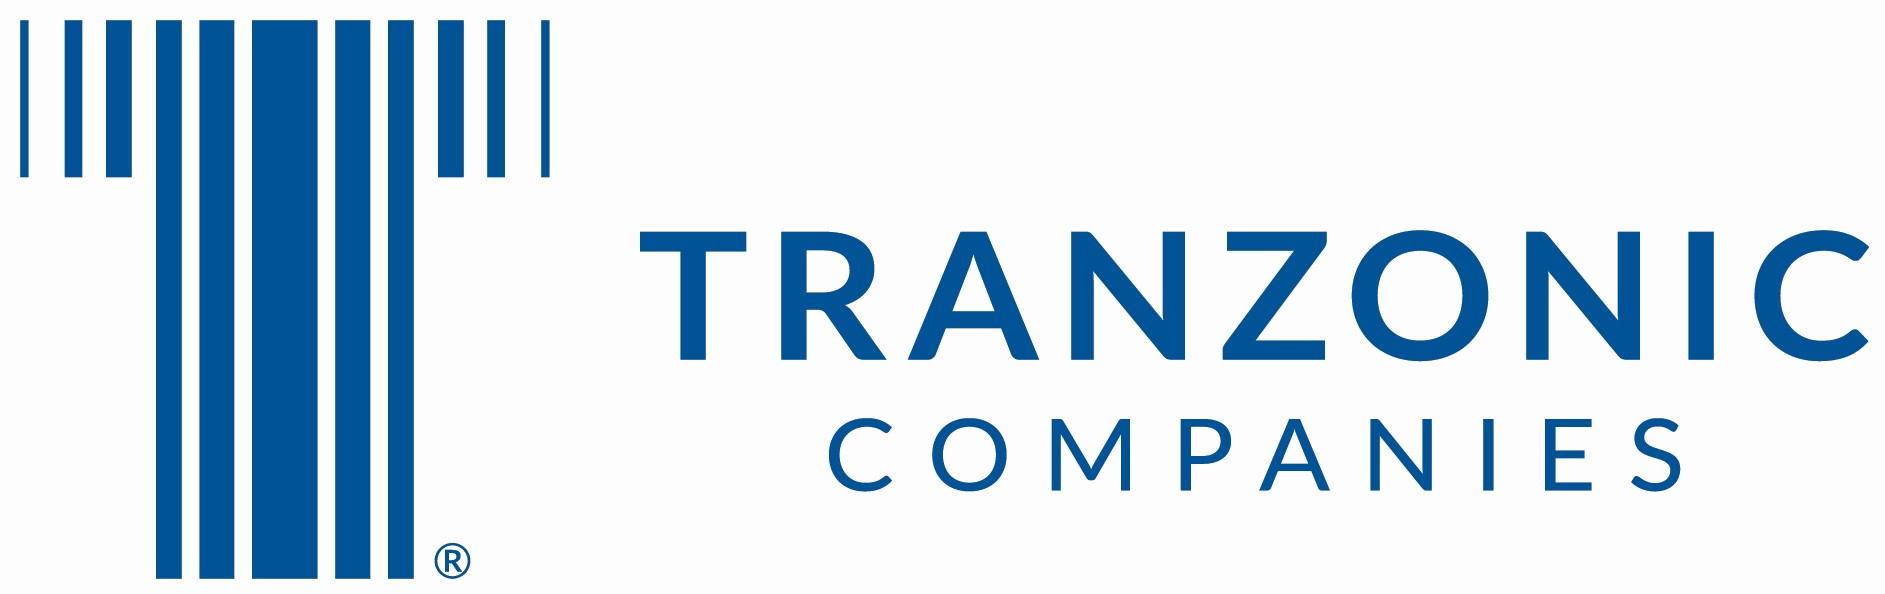 The Tranzonic Companies completes acquisition of Innocore Sales & Marketing